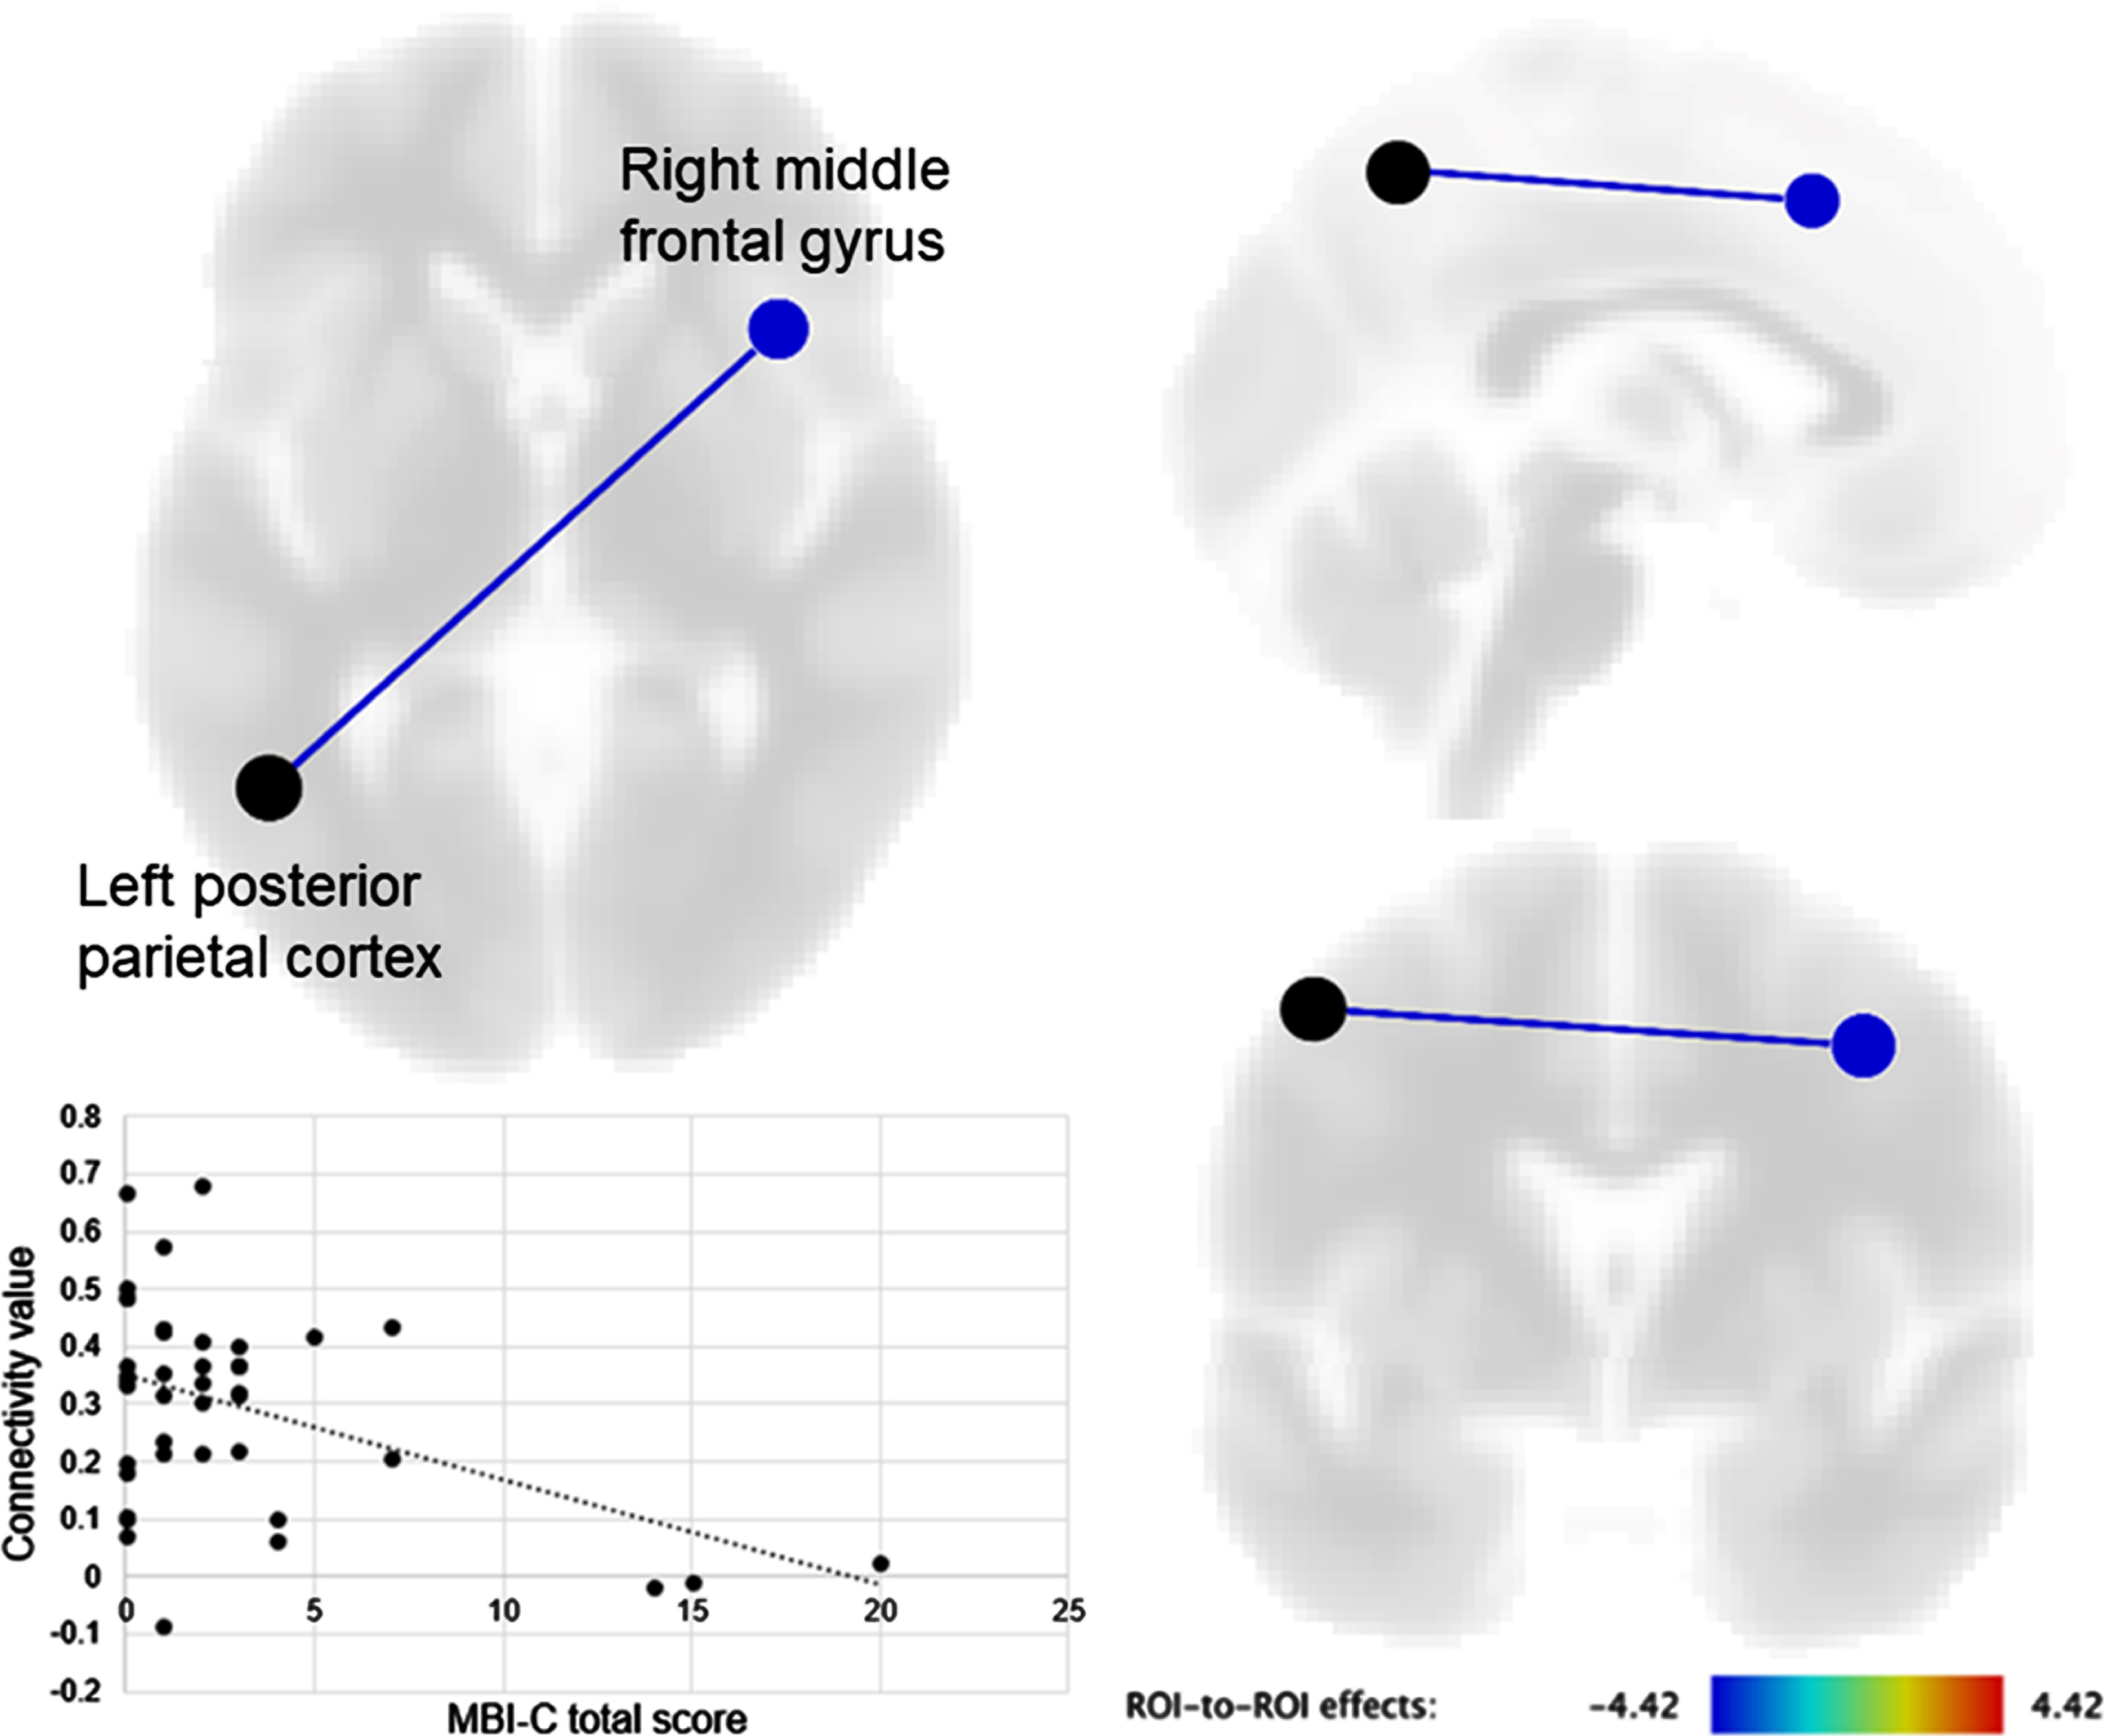 Brain regions showing a significant correlation of seed functional connectivity with the mild behavioral impairment checklist (MBI-C) total score. The connectivity value between the left posterior parietal cortex and right middle frontal gyrus was negatively correlated with the MBI-C total score.